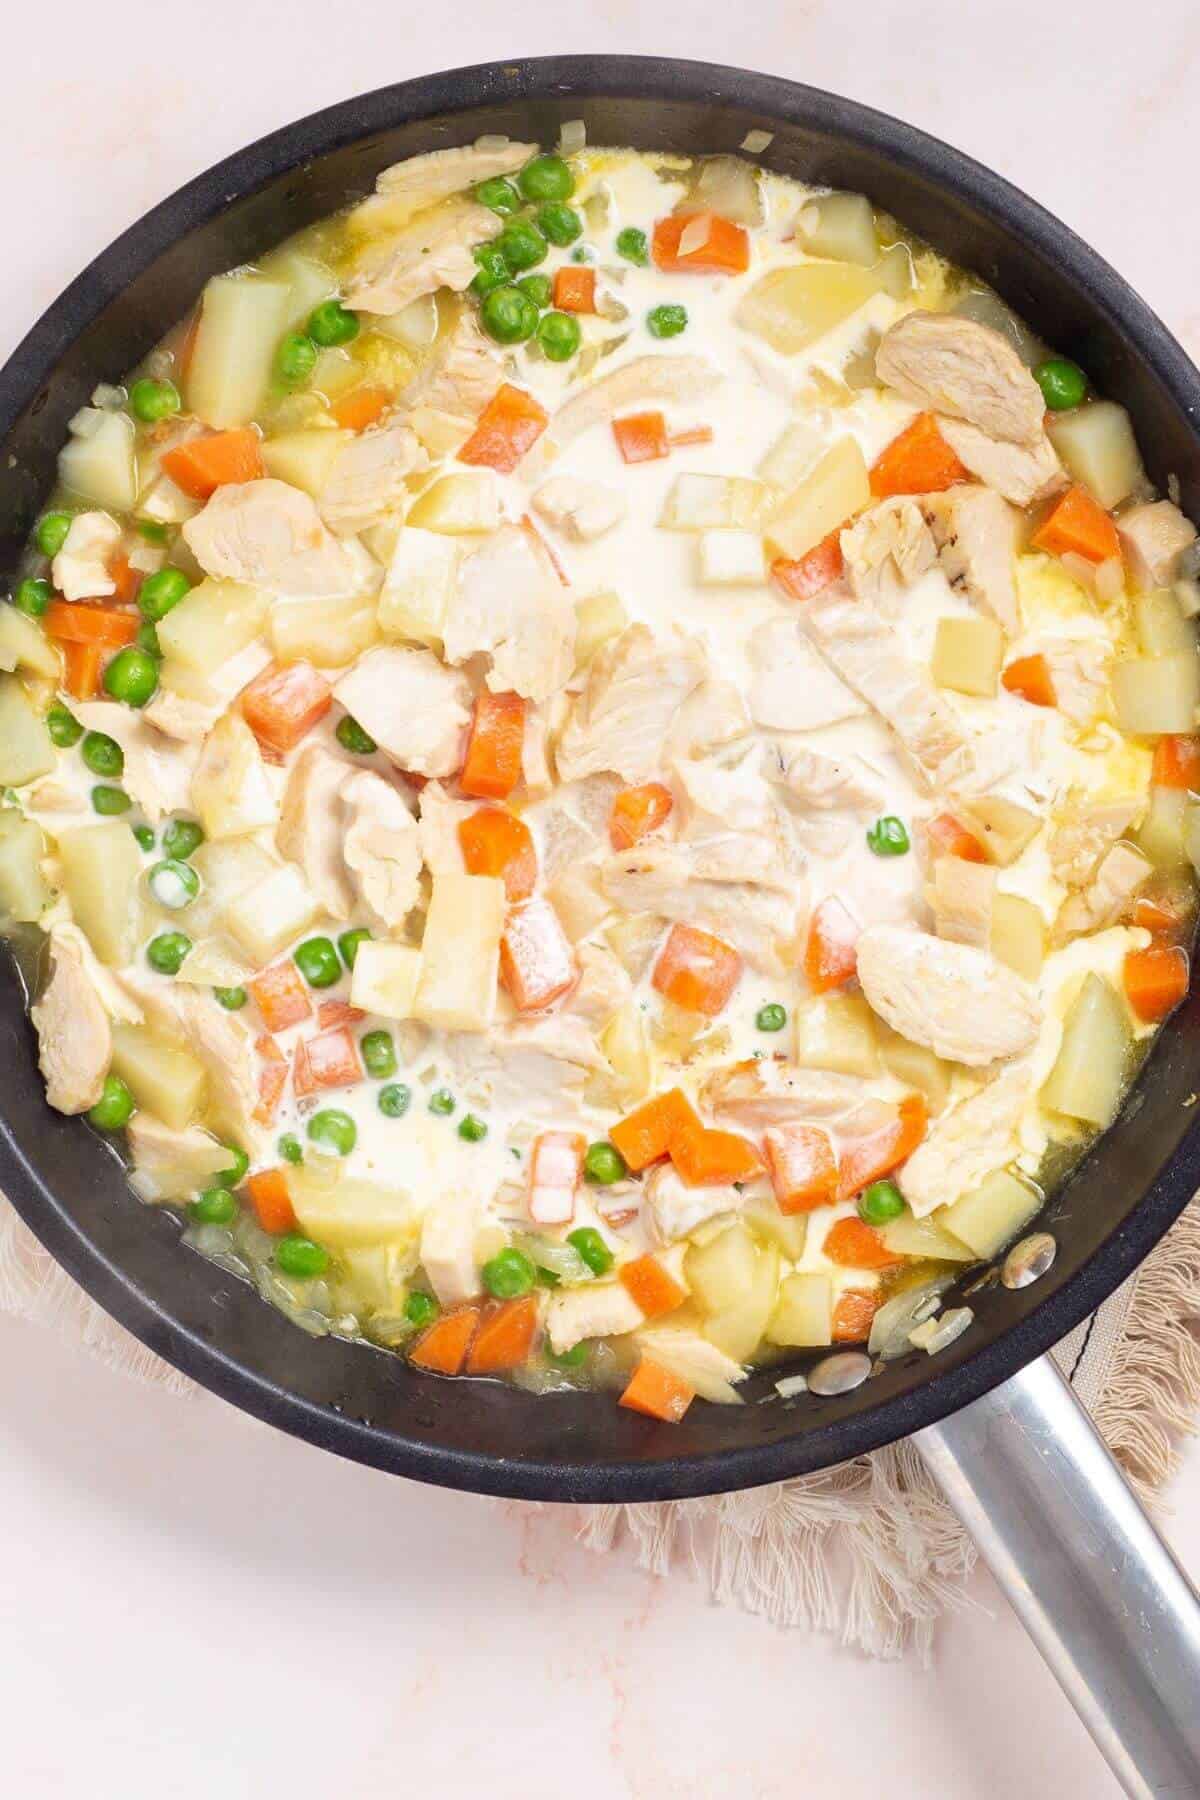 Broth and chicken added to skillet.